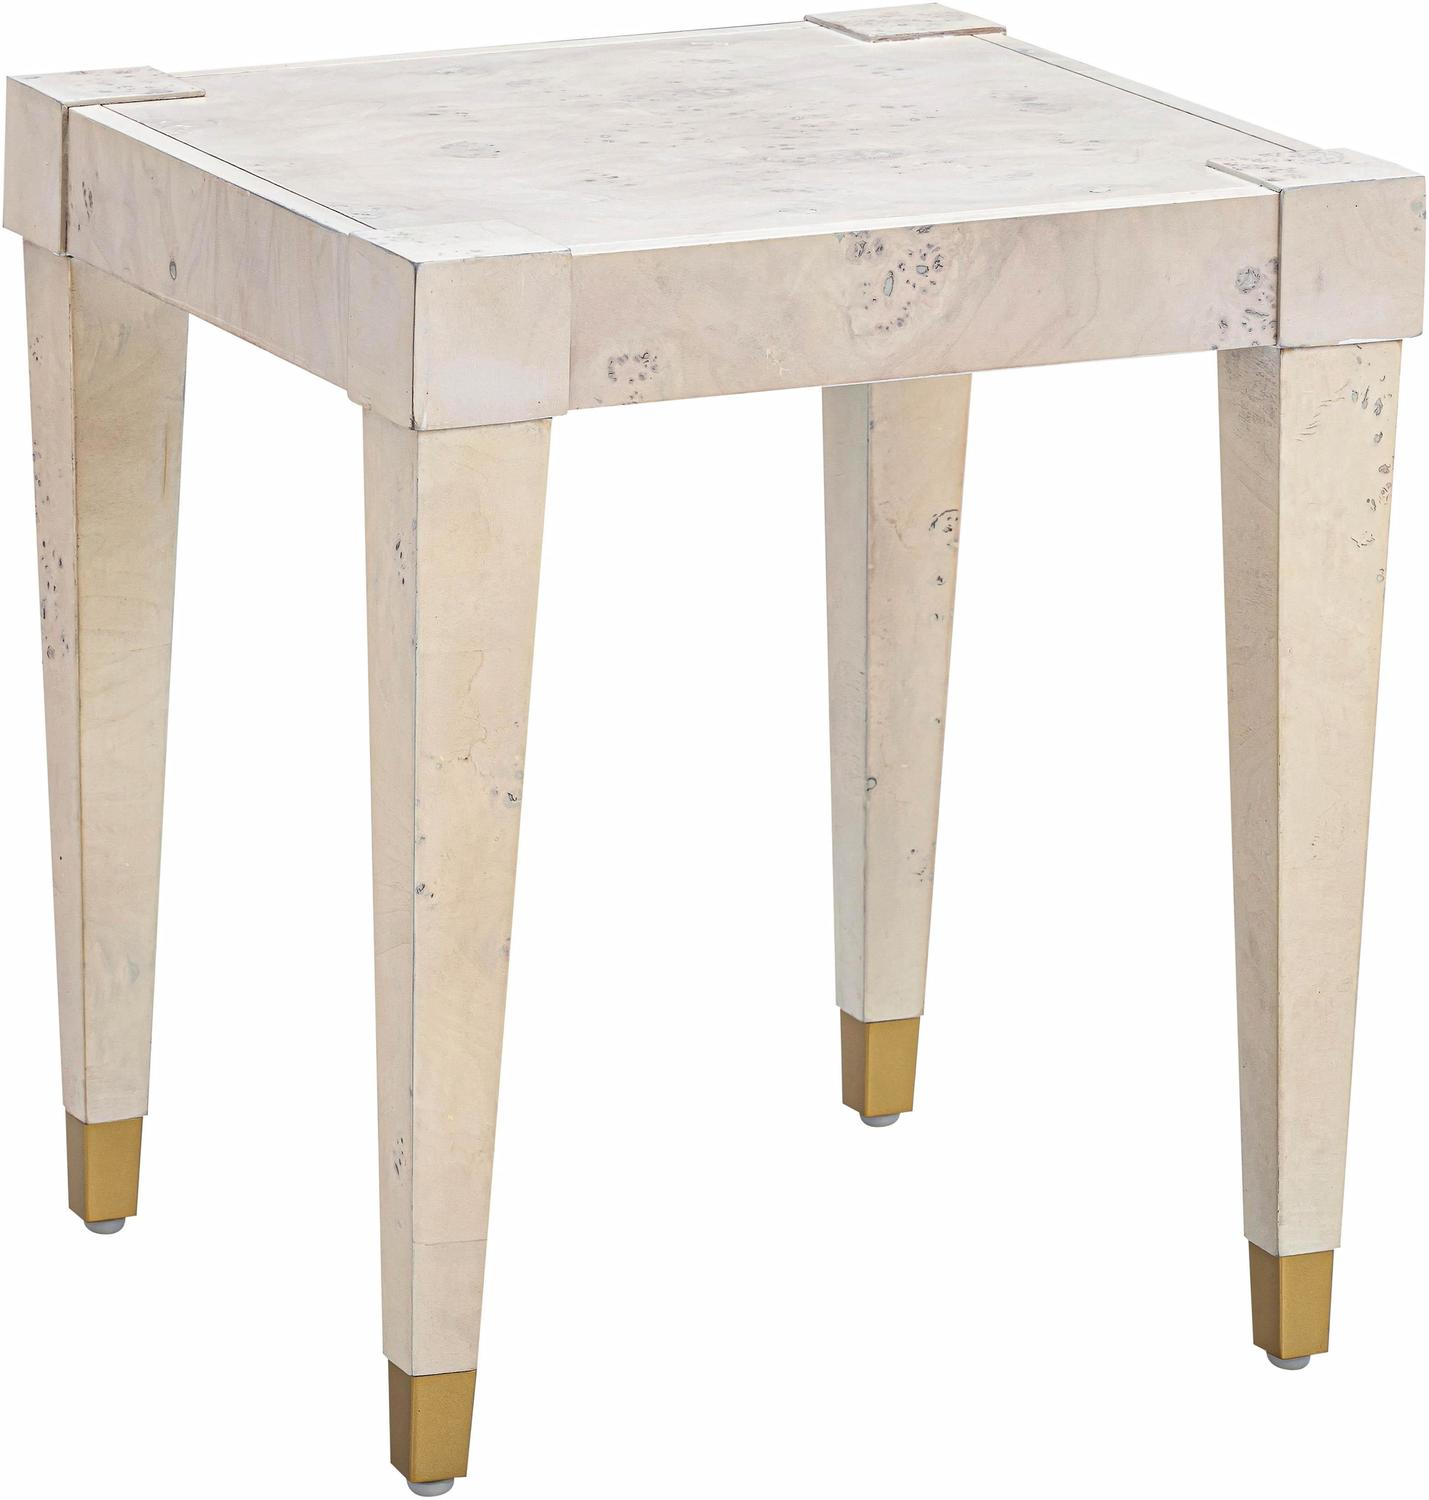  Tov Furniture Side Tables Accent Tables White